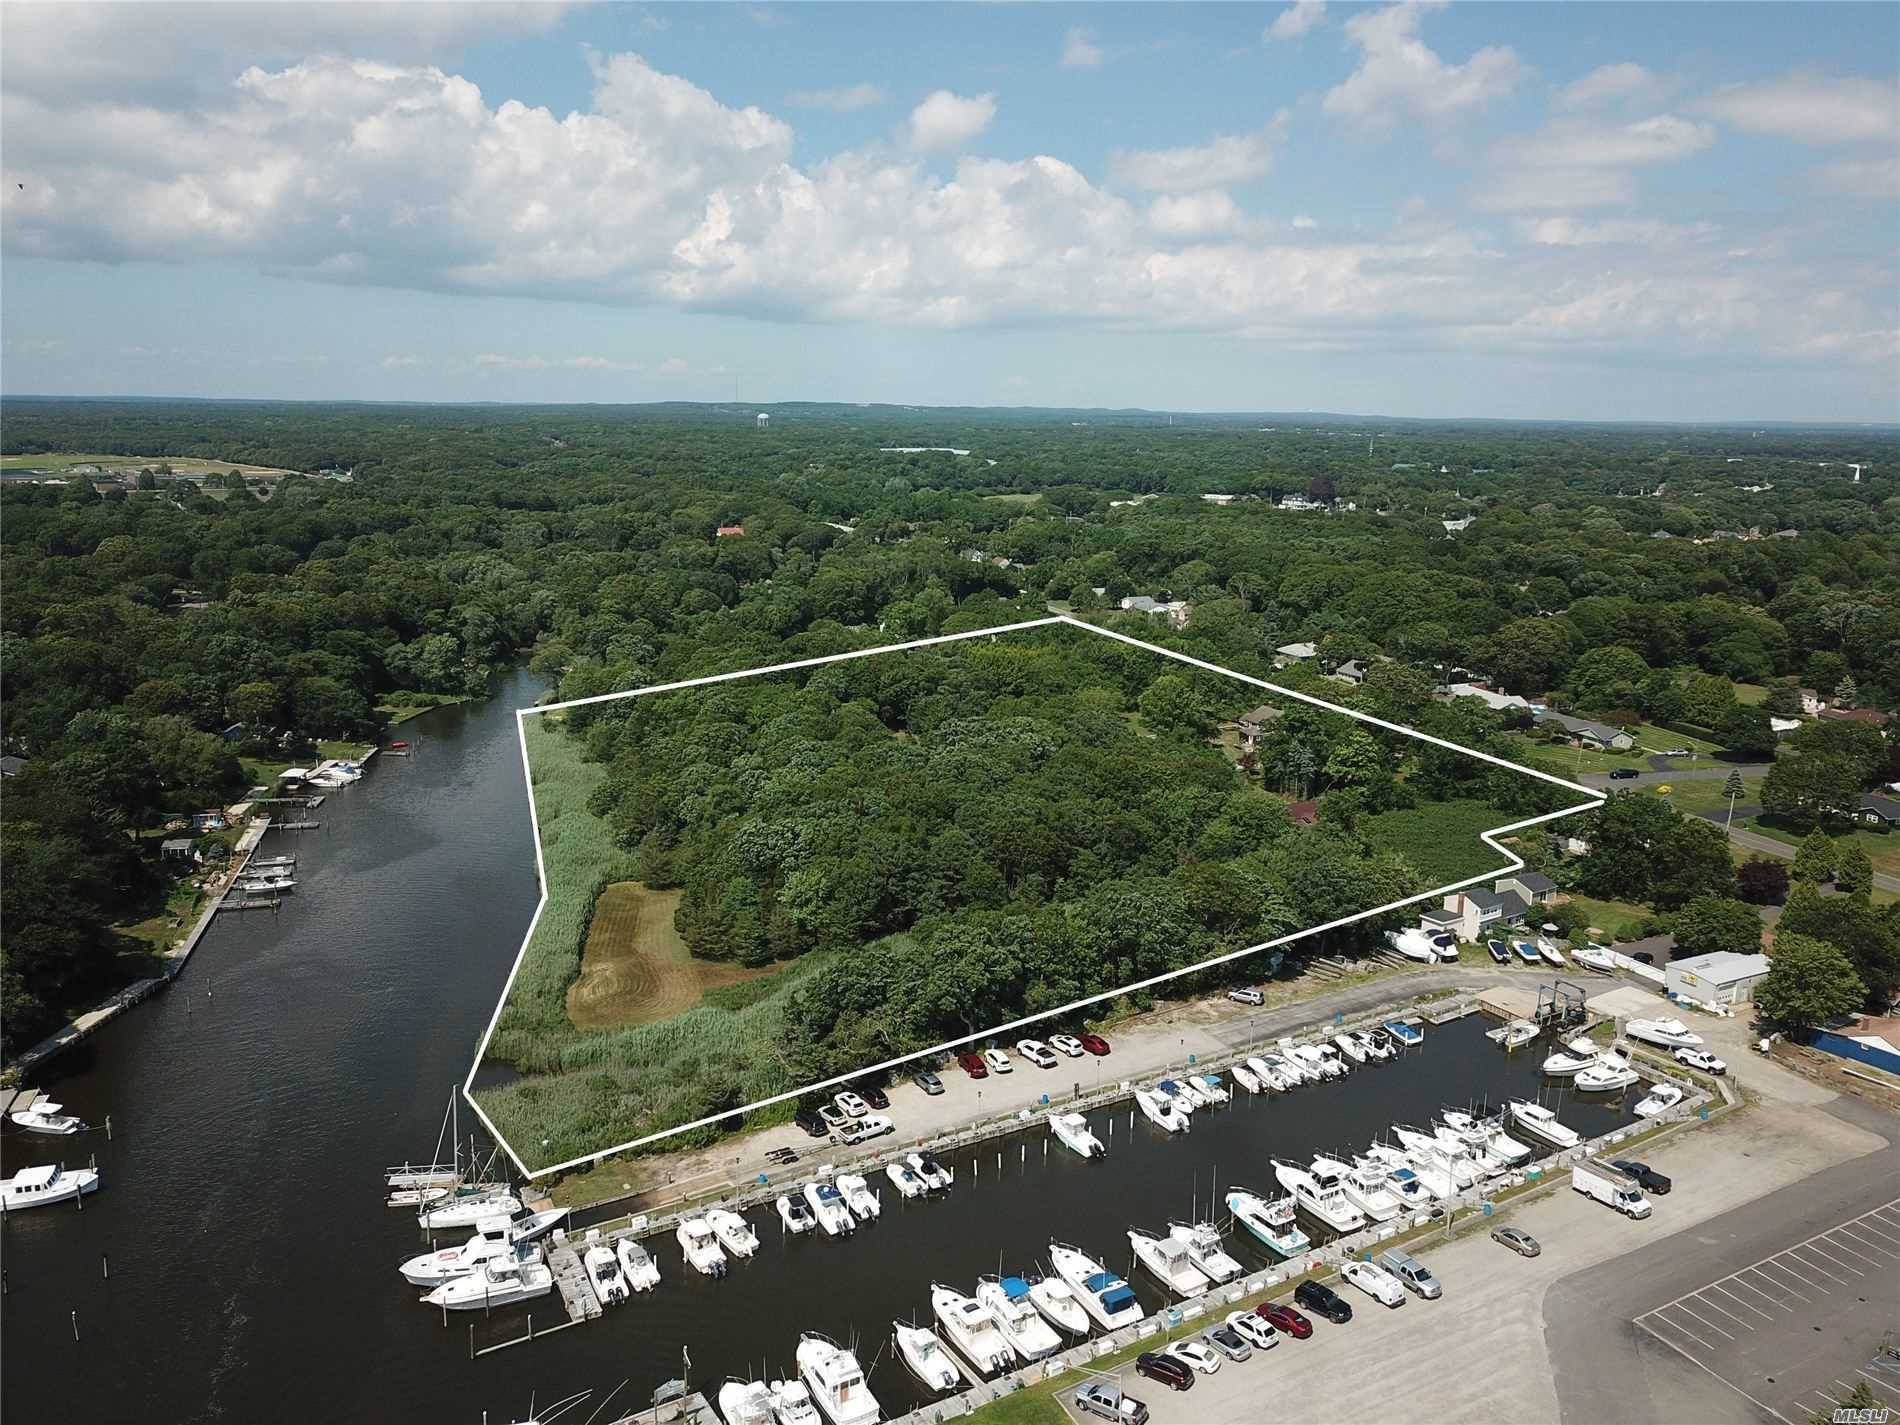 Build your own dream family waterfront compound, or a possible subdivision.